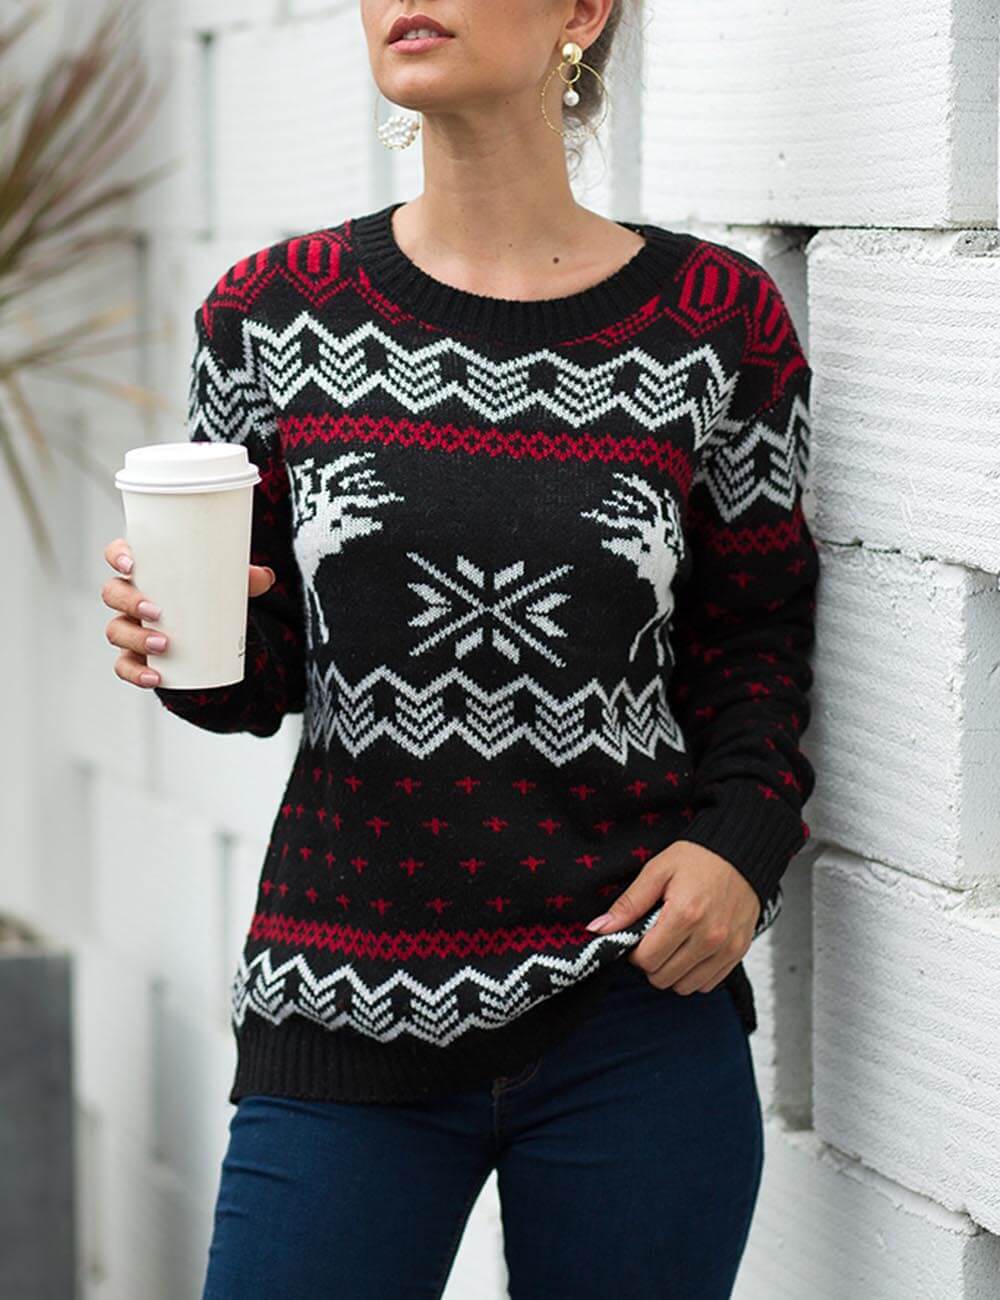  Women's Stylish Christmas Reindeer Sweater Round Neck Long Sleeve Loose Knit Pullover Cardigan Jumper